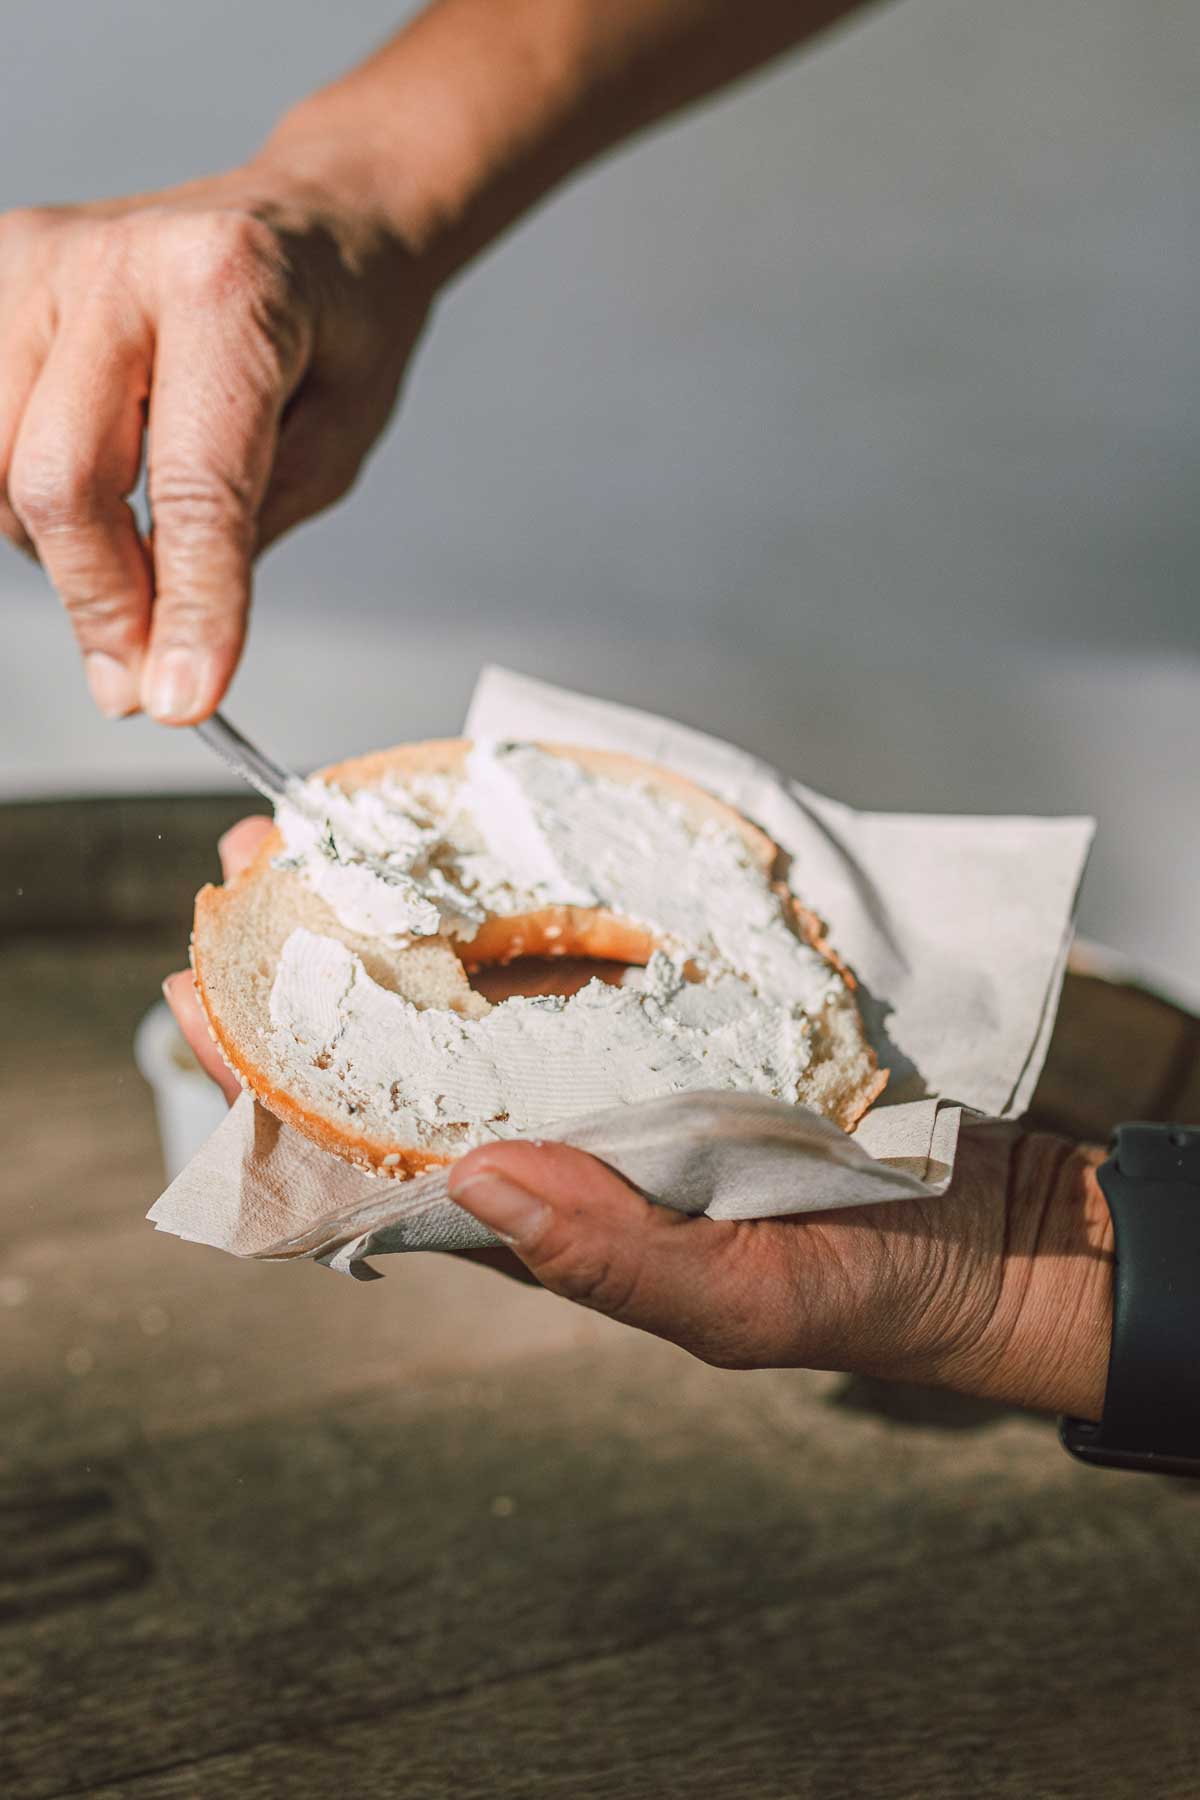 A person spreading cream cheese on a bagel.